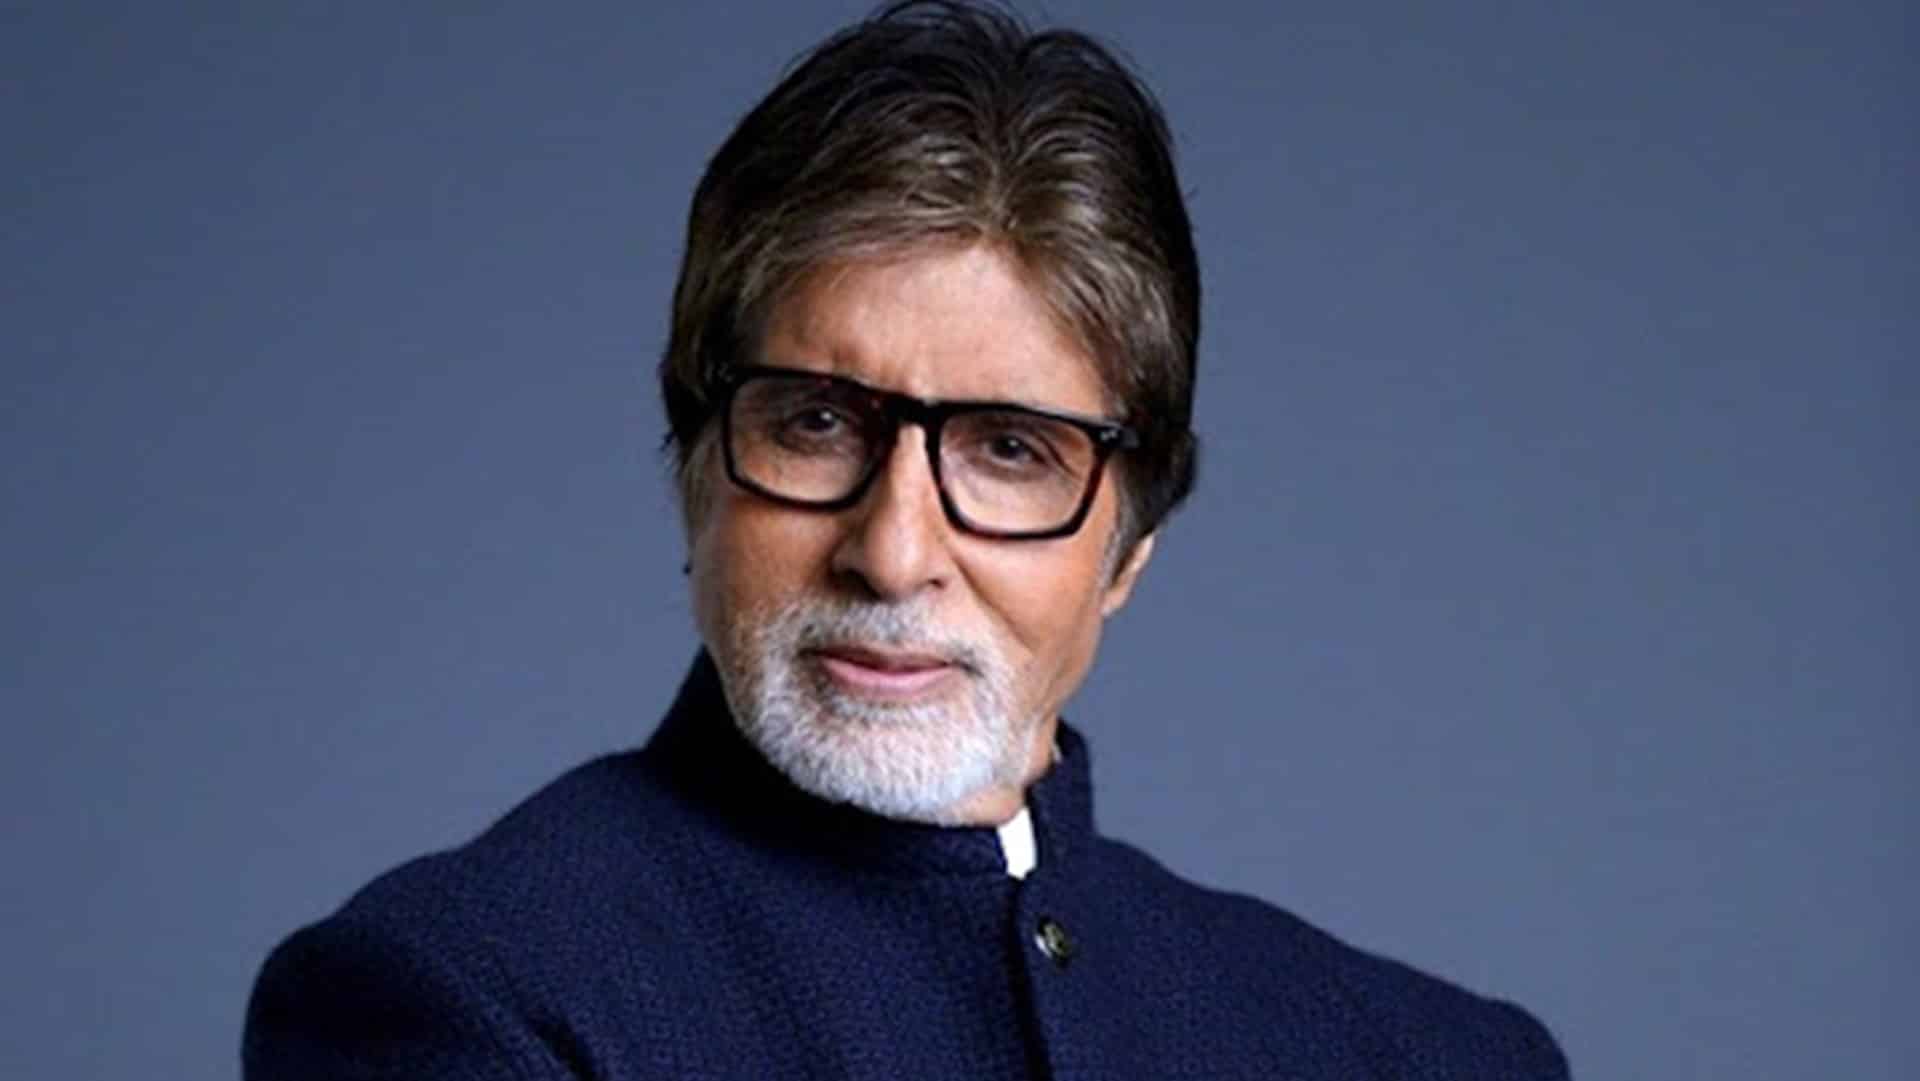 Amitabh Bachchan's exclusive NFT collection auctioned for over Rs 7cr